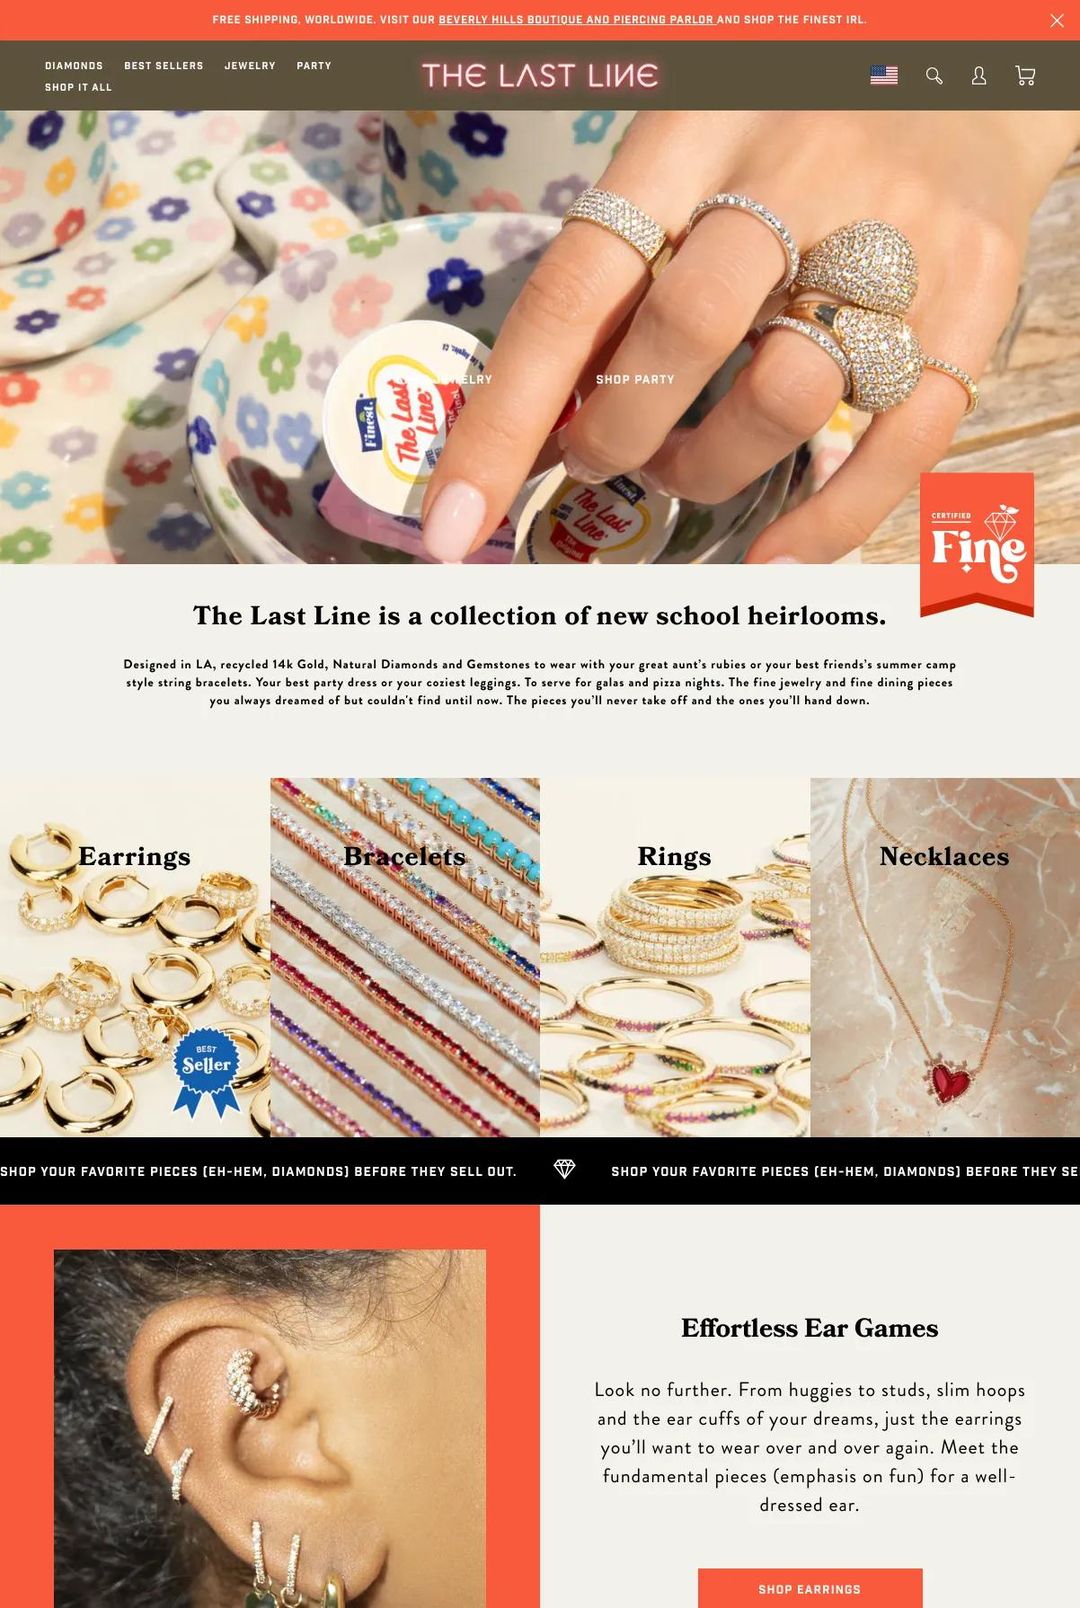 Screenshot 1 of The Last Line (Example Shopify Jewelry Website)